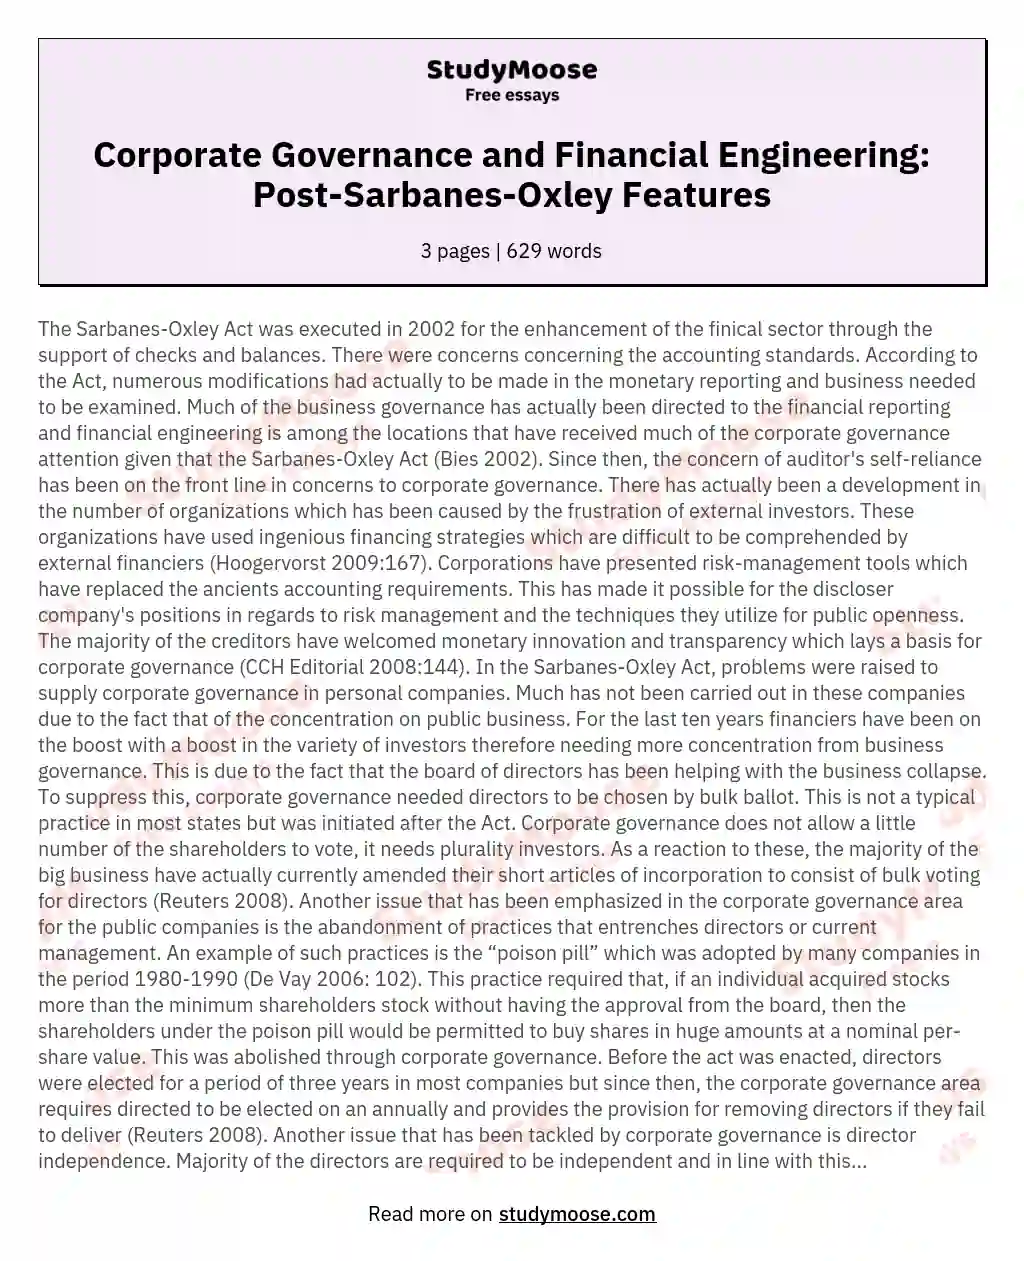 The Salient Features Of Corporate Governance On Financial Engineering After The Sarbanes-Oxley Act